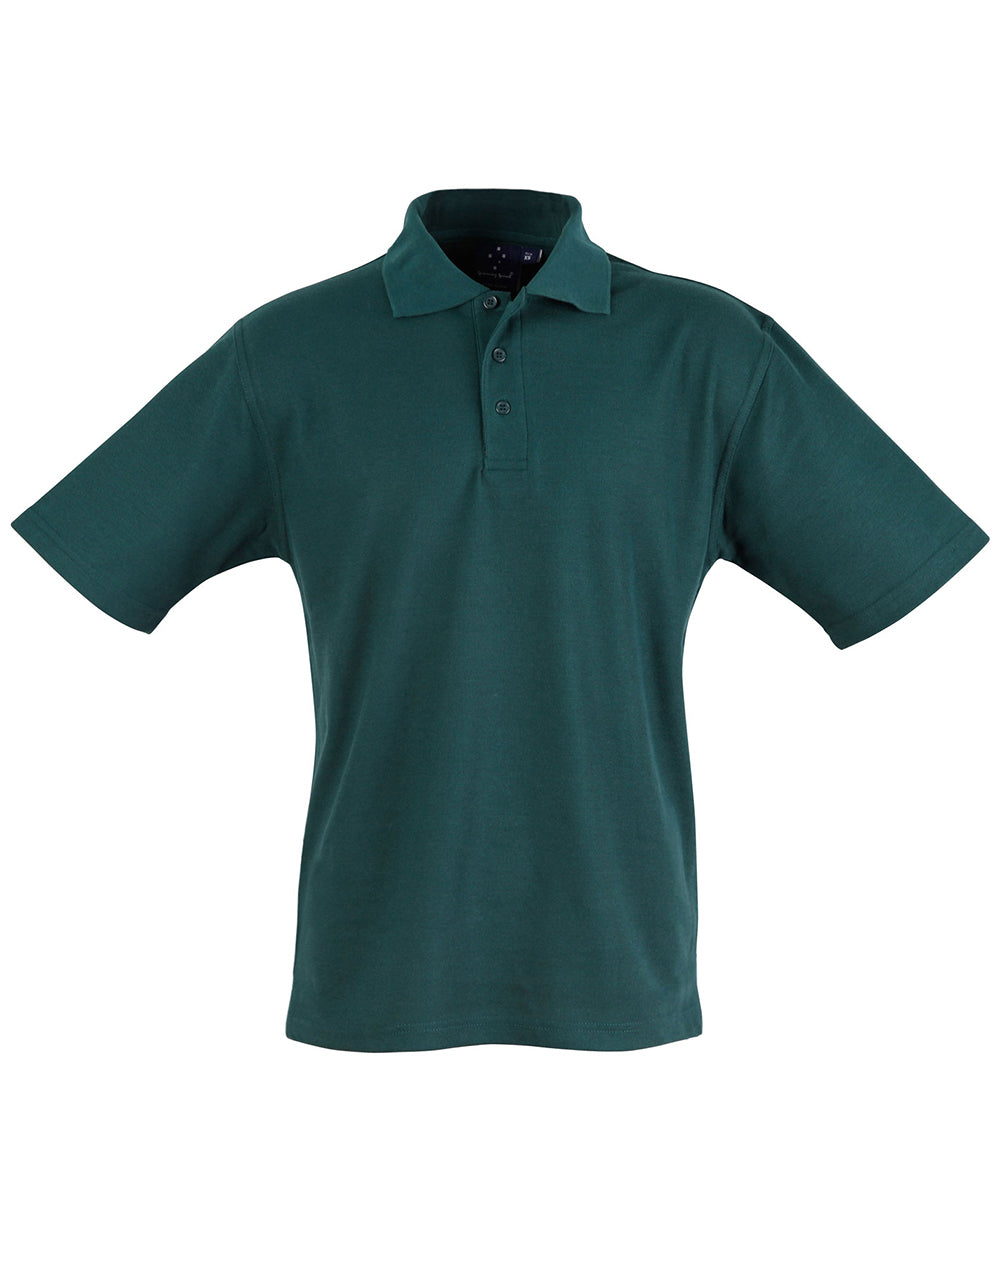 Kids Pique Knit Polo - made by AIW